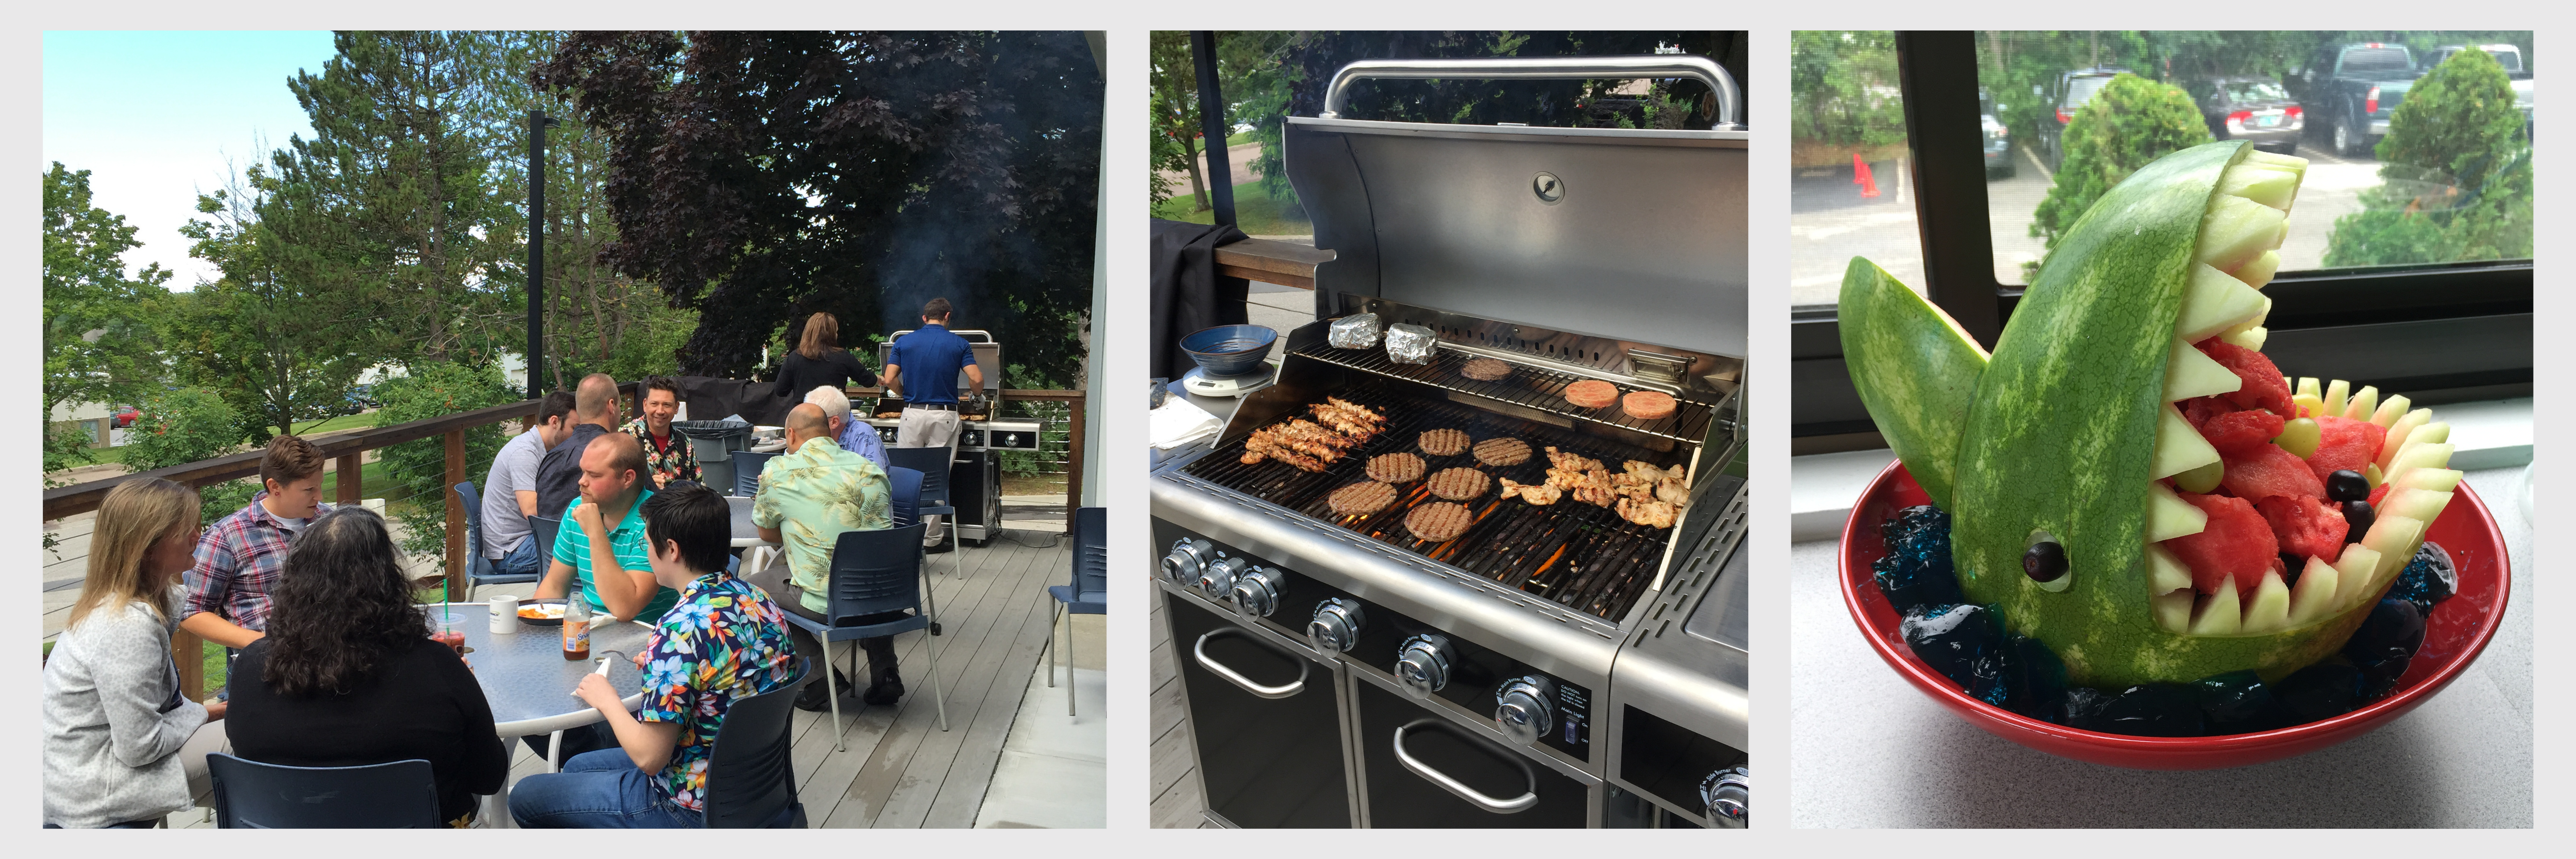 Photos of Instrumart employees enjoying a summer barbecue meal at the office.